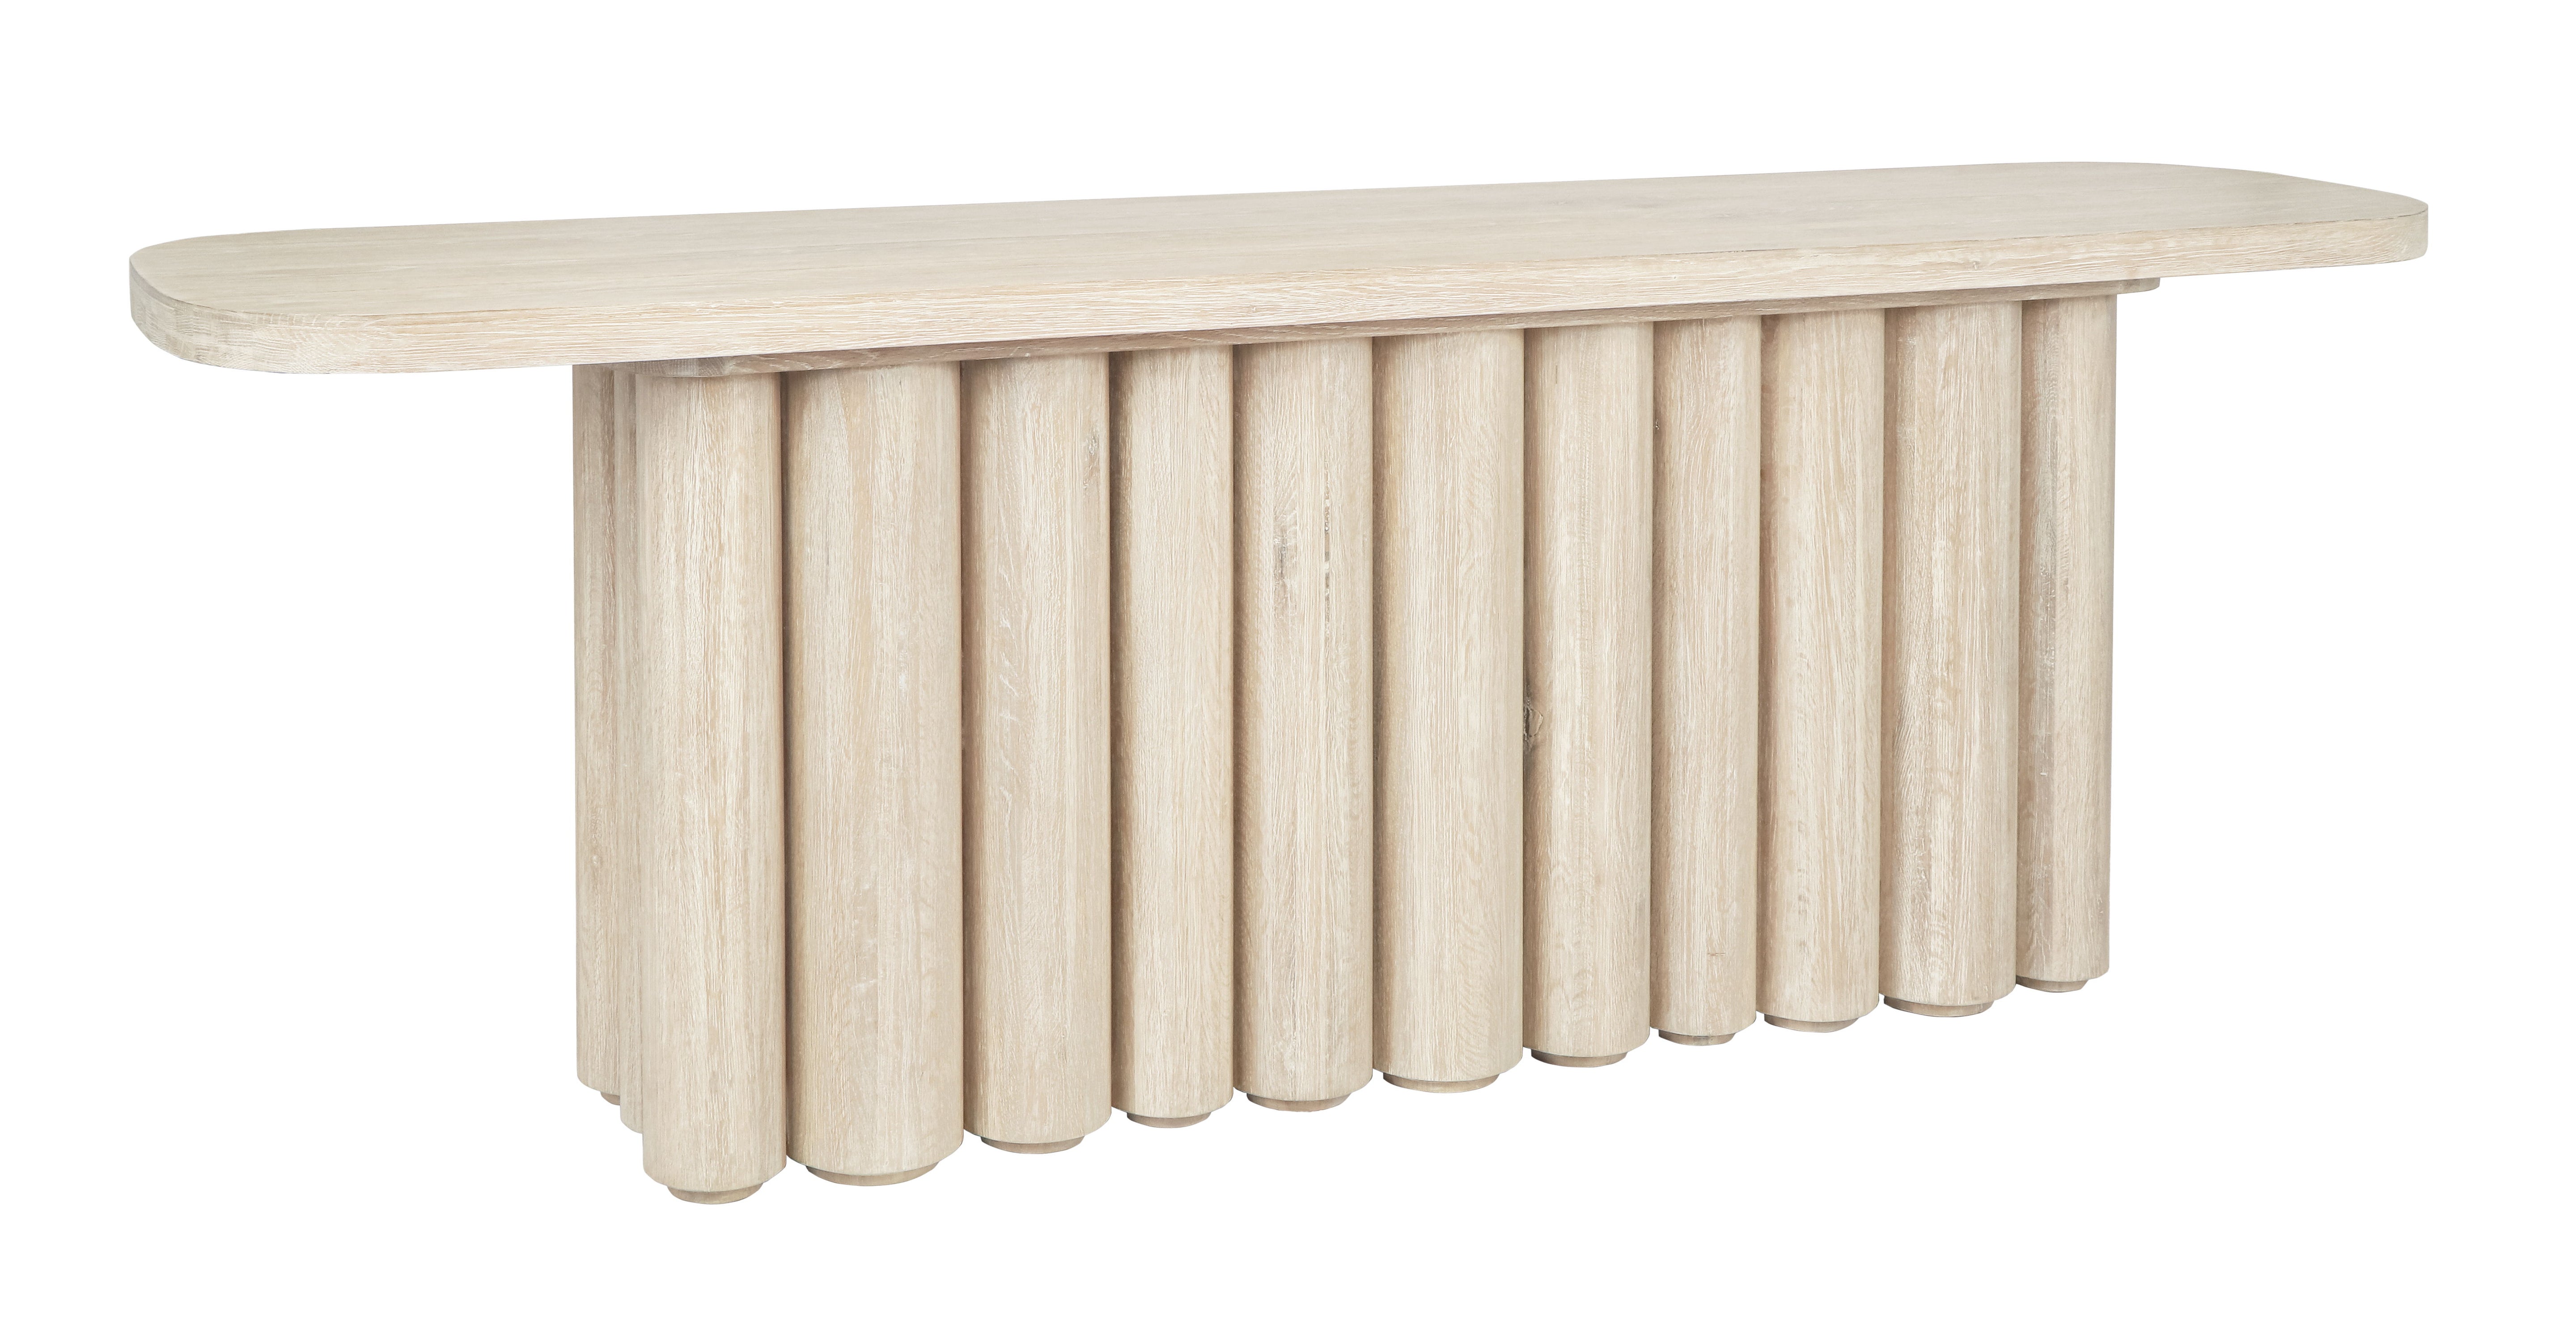 Tiber - Oak Wood Console Table - White Washed